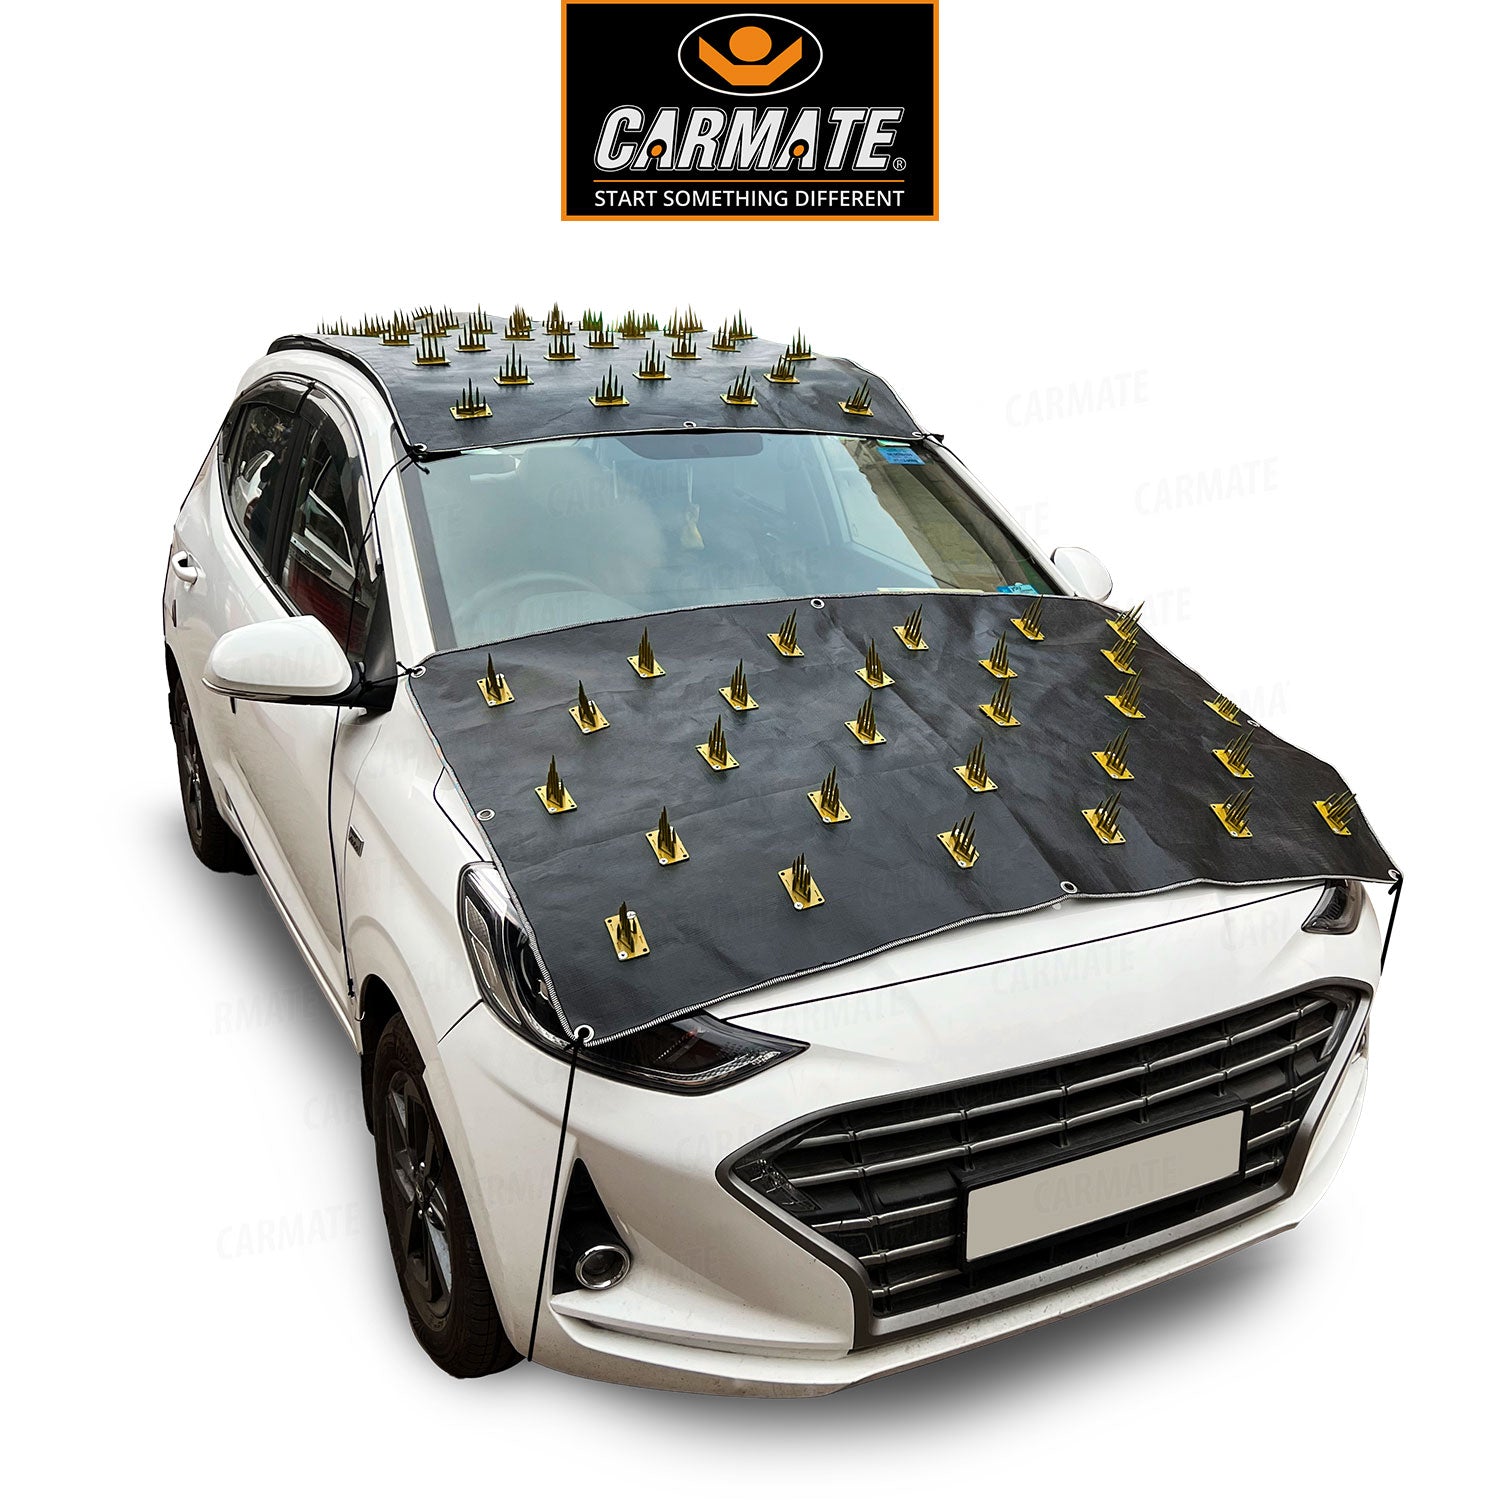 New CARMATE Car Protection Cover from Monkey and Dog for All Car – CARMATE®